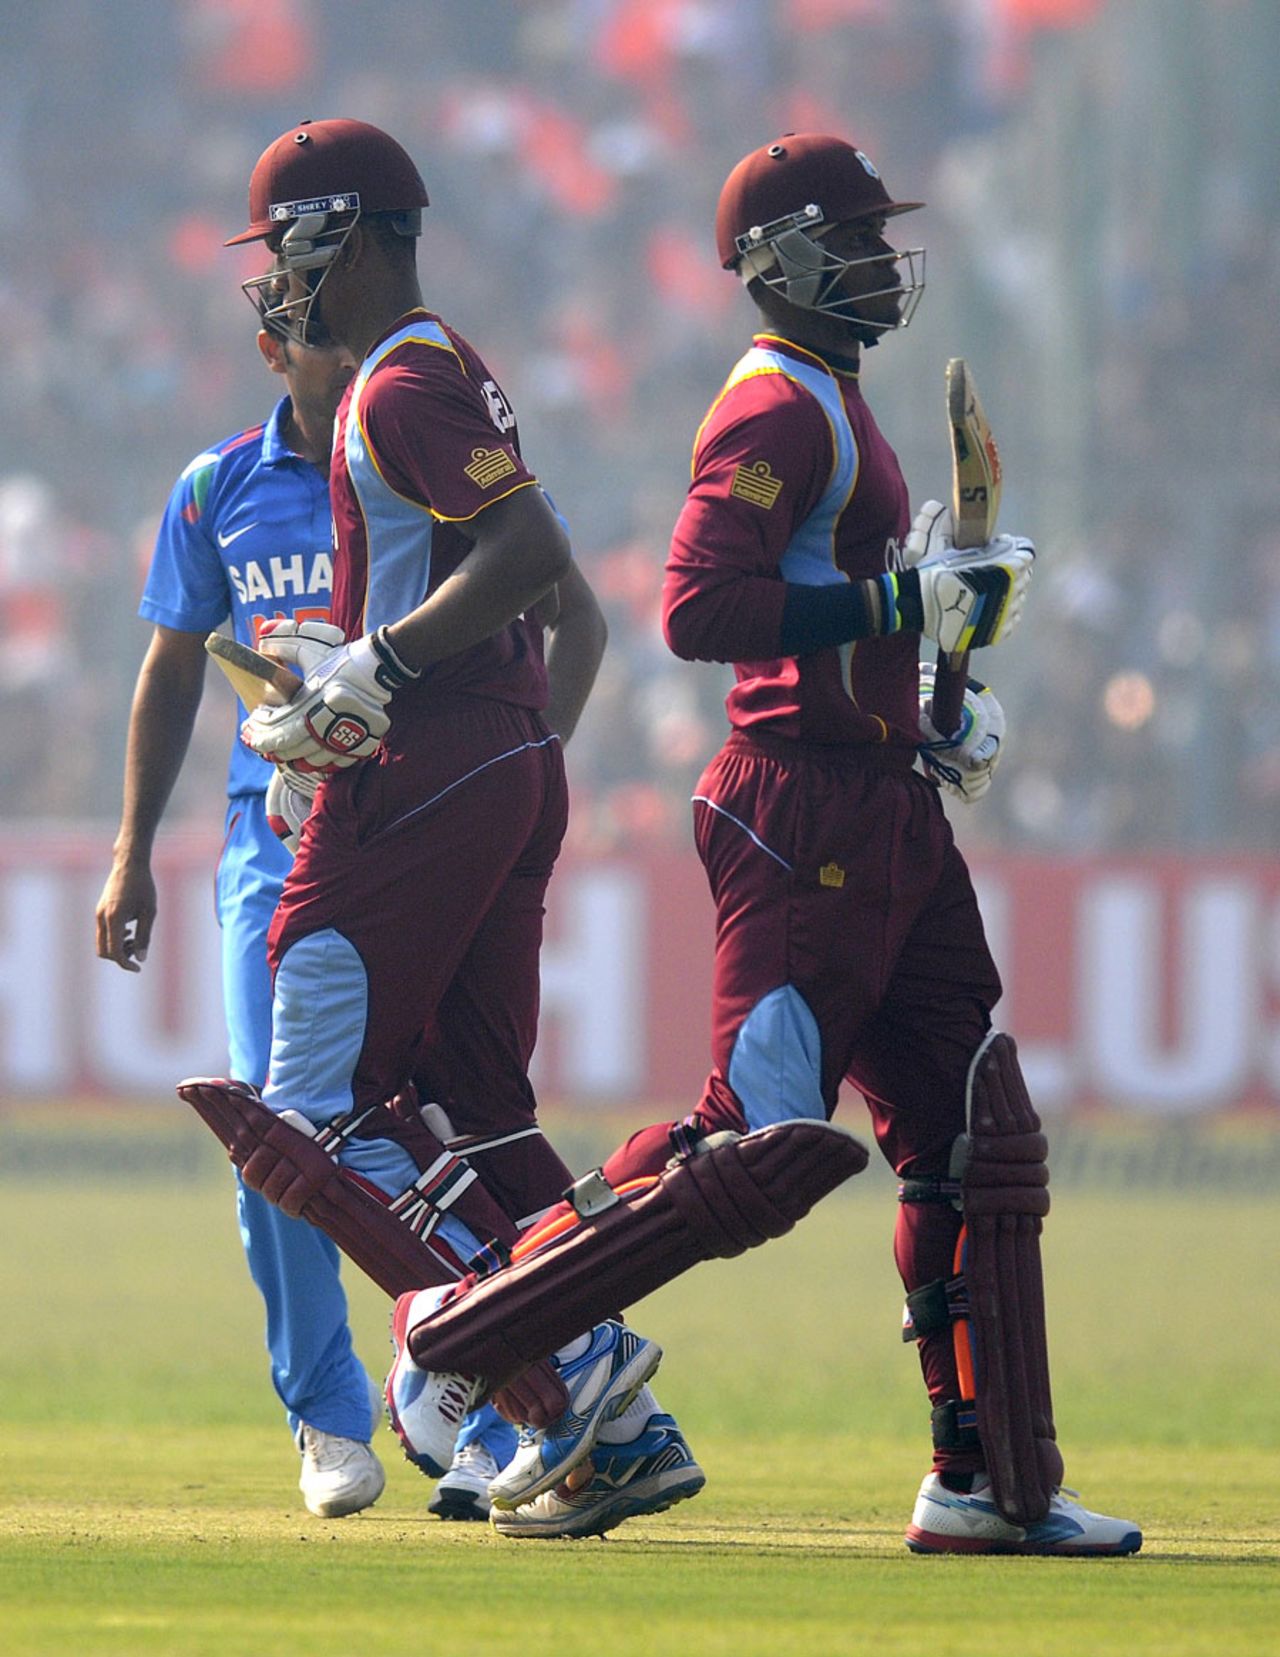 Marlon Samuels and Kieran Powell added 117 for the second wicket, India v West Indies, 3rd ODI, Kanpur, November 27, 2013